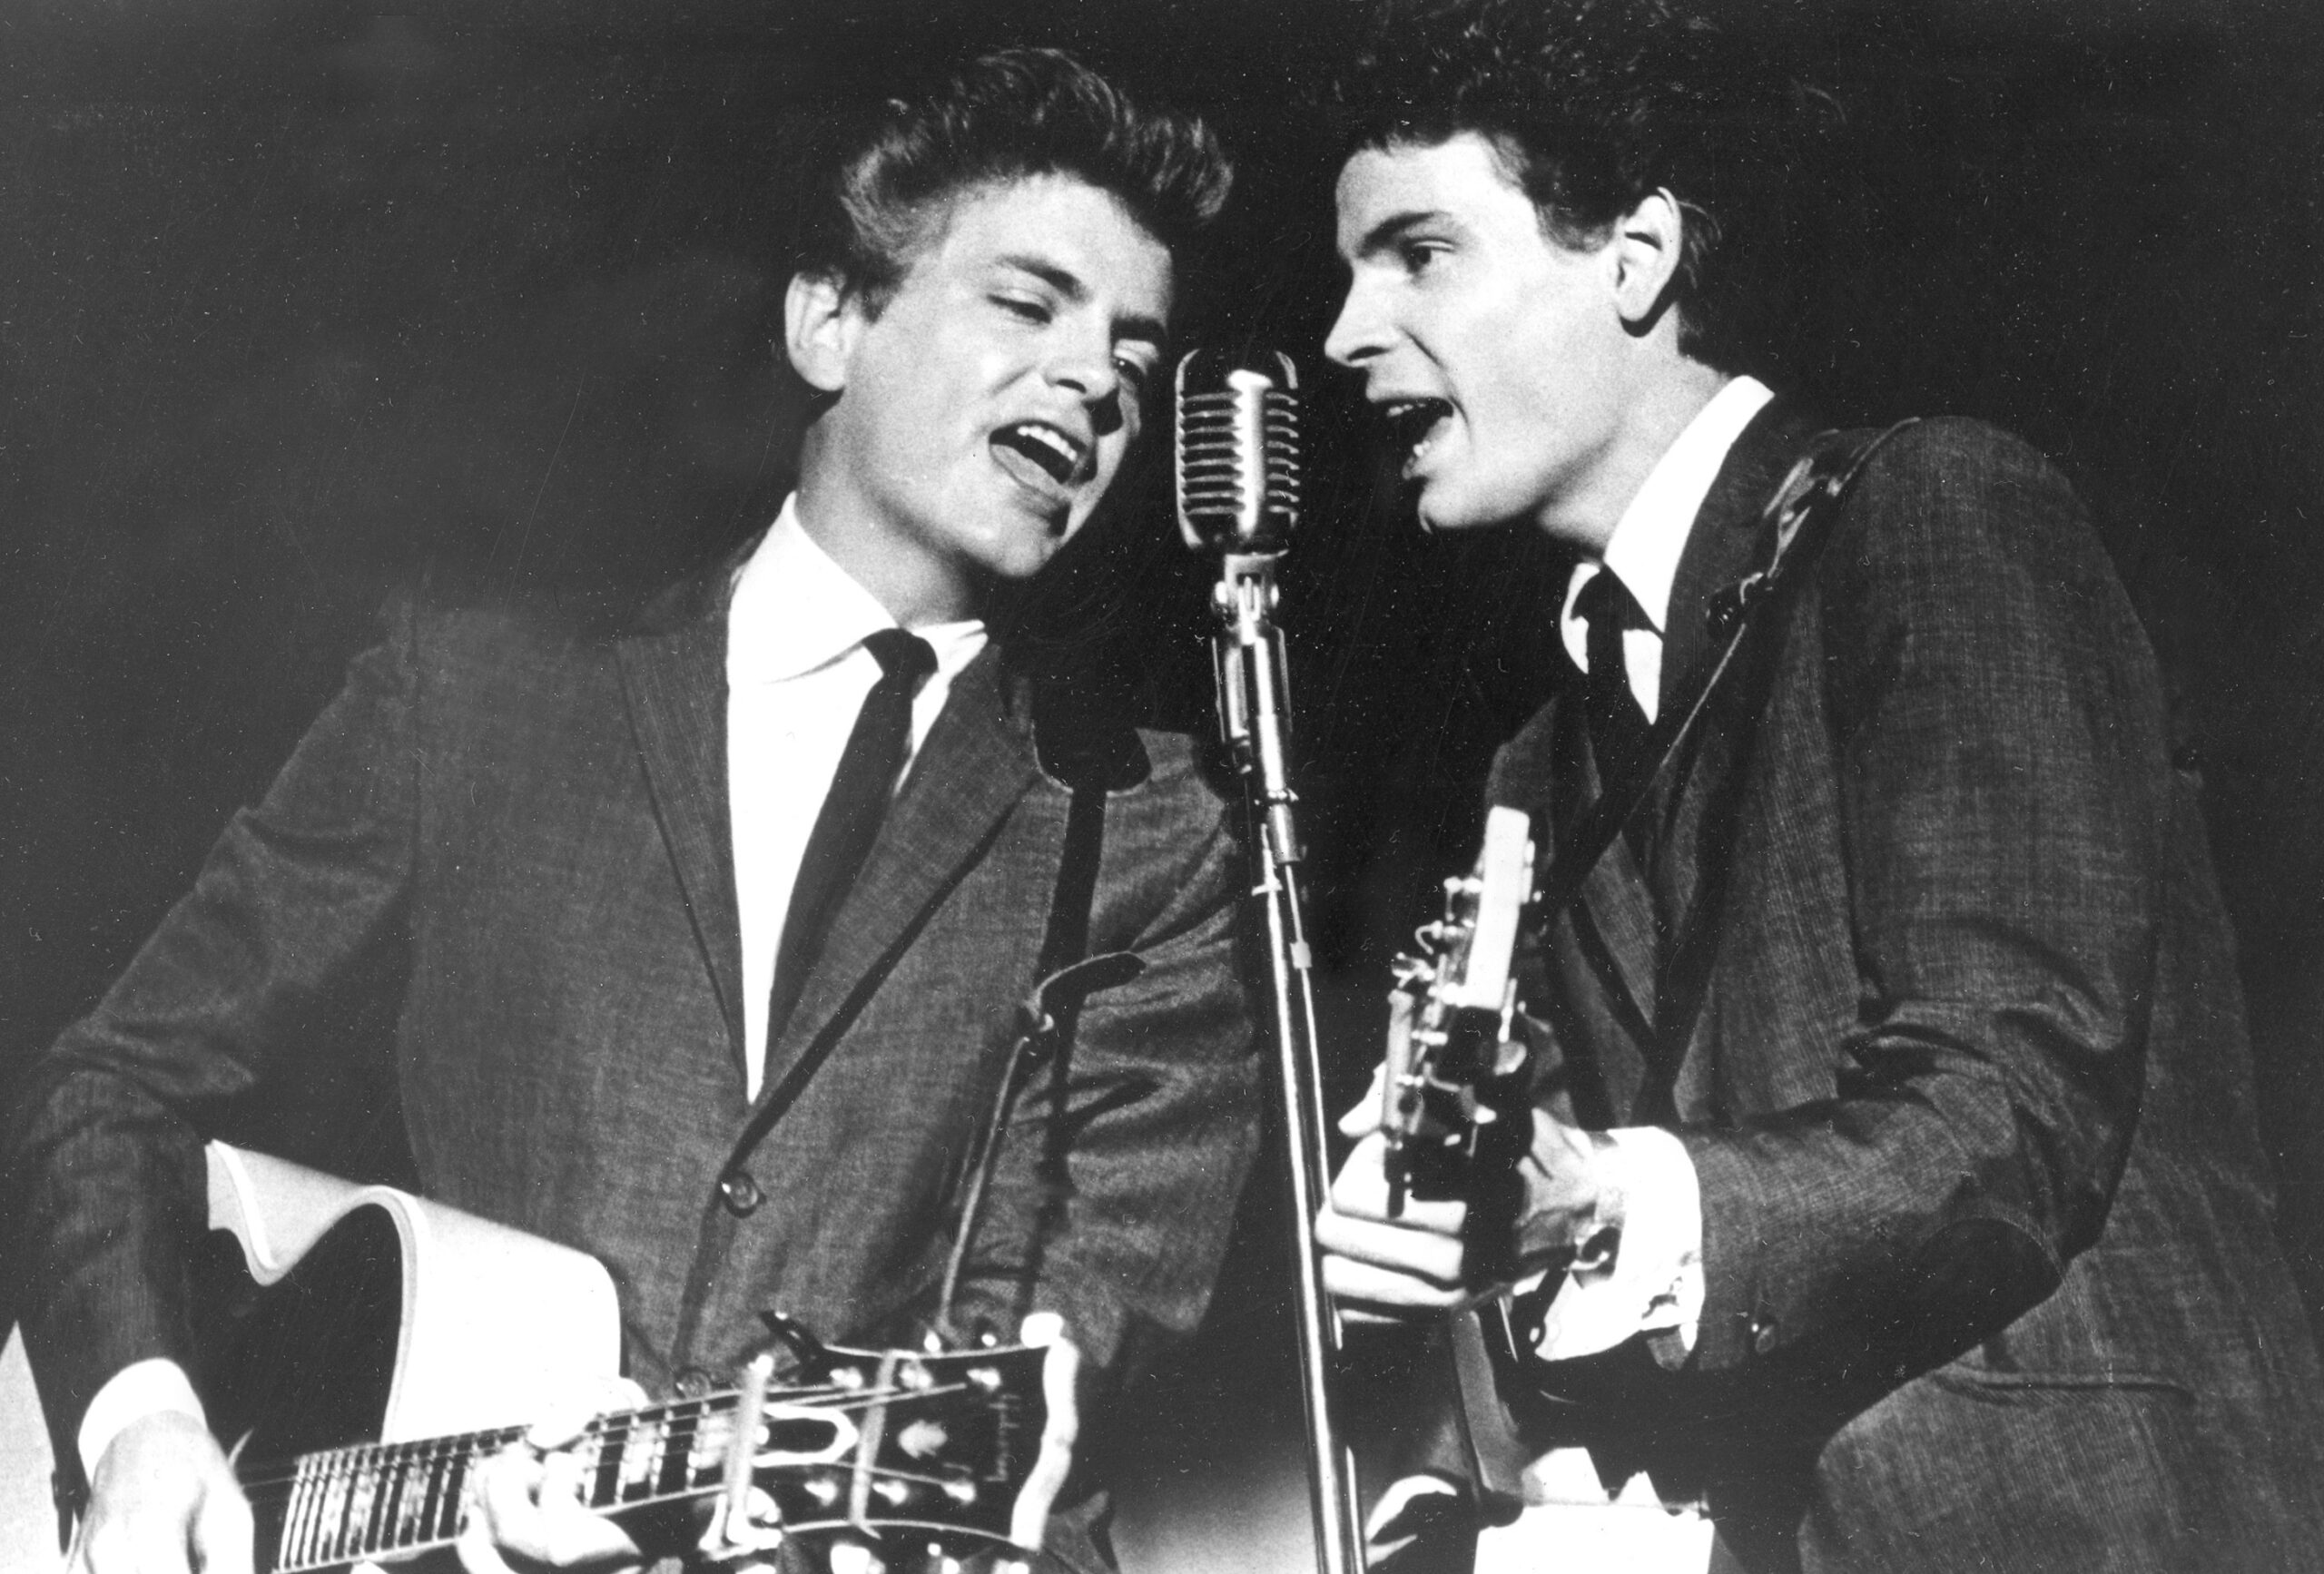 Featured image for “Don Everly, Half Of The Quintessential Harmonic Duo The Everly Brothers, Dies At 84”